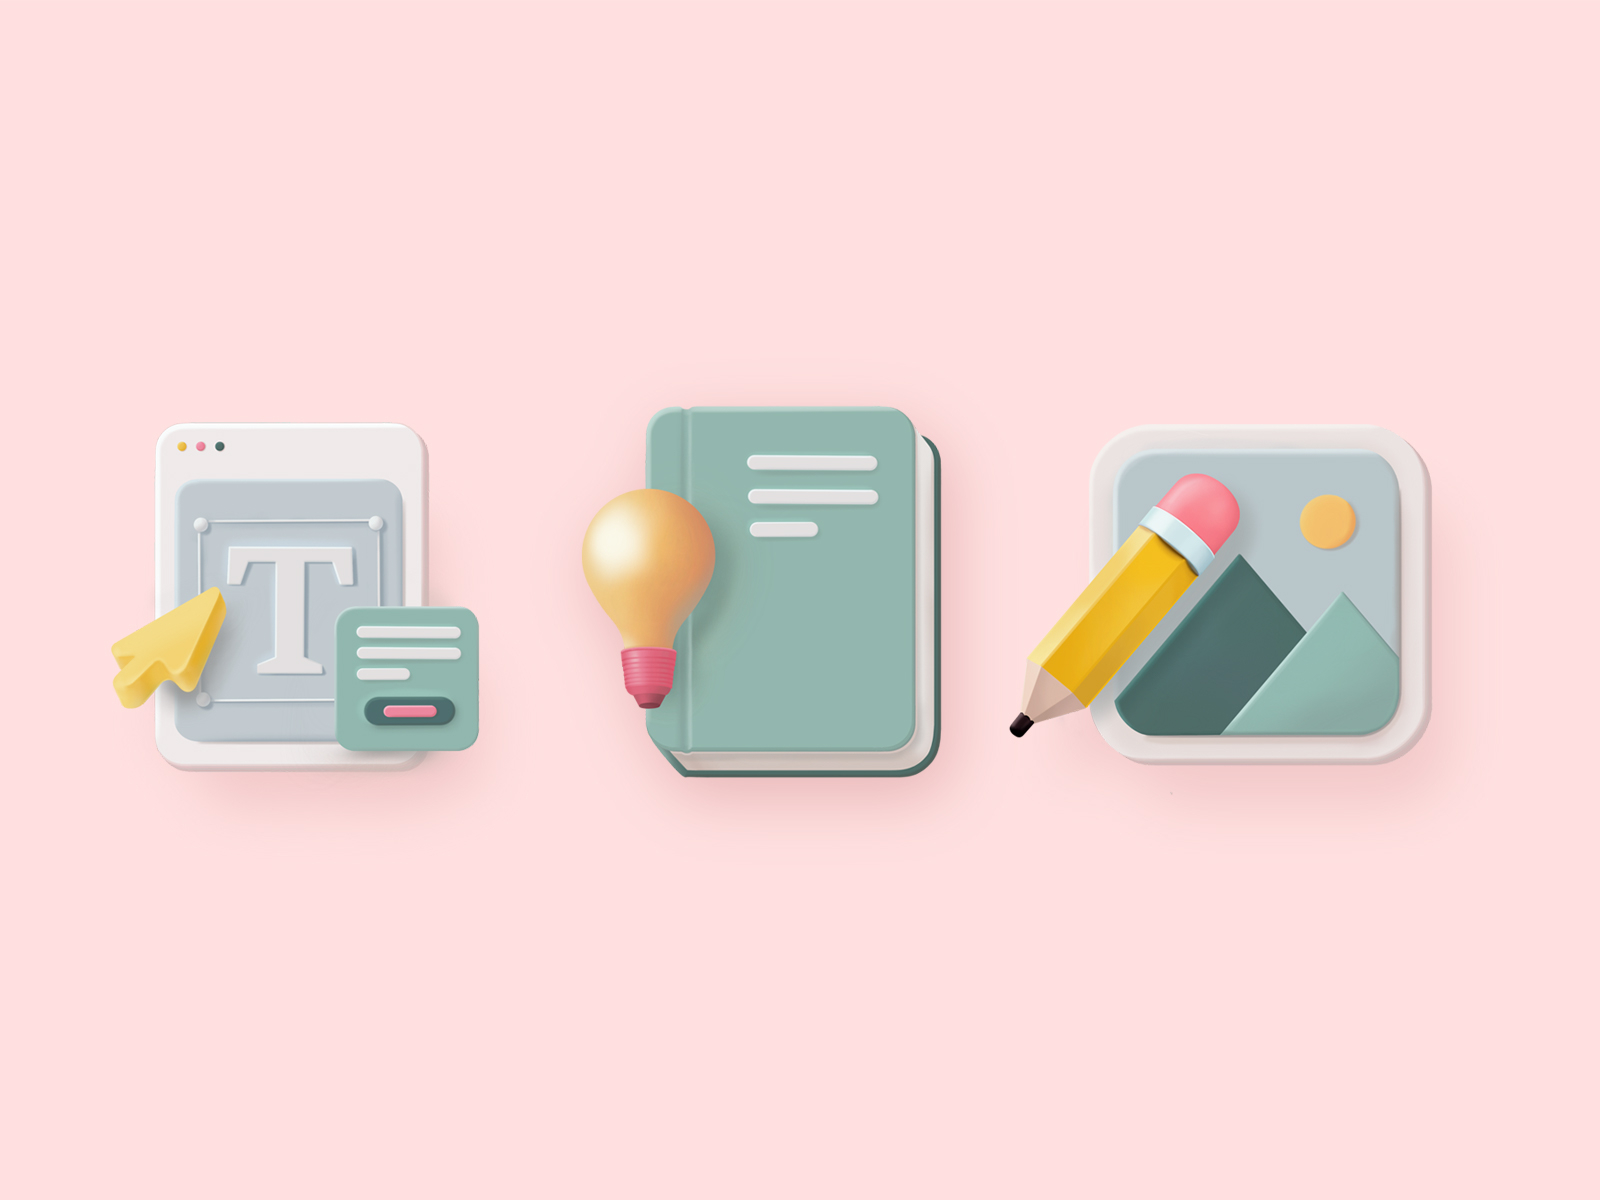 PSD icons free to download download psd free icon icon design icon set icondesign iconography icons icons design icons pack icons set iconset illustration pack procreate psd psd download